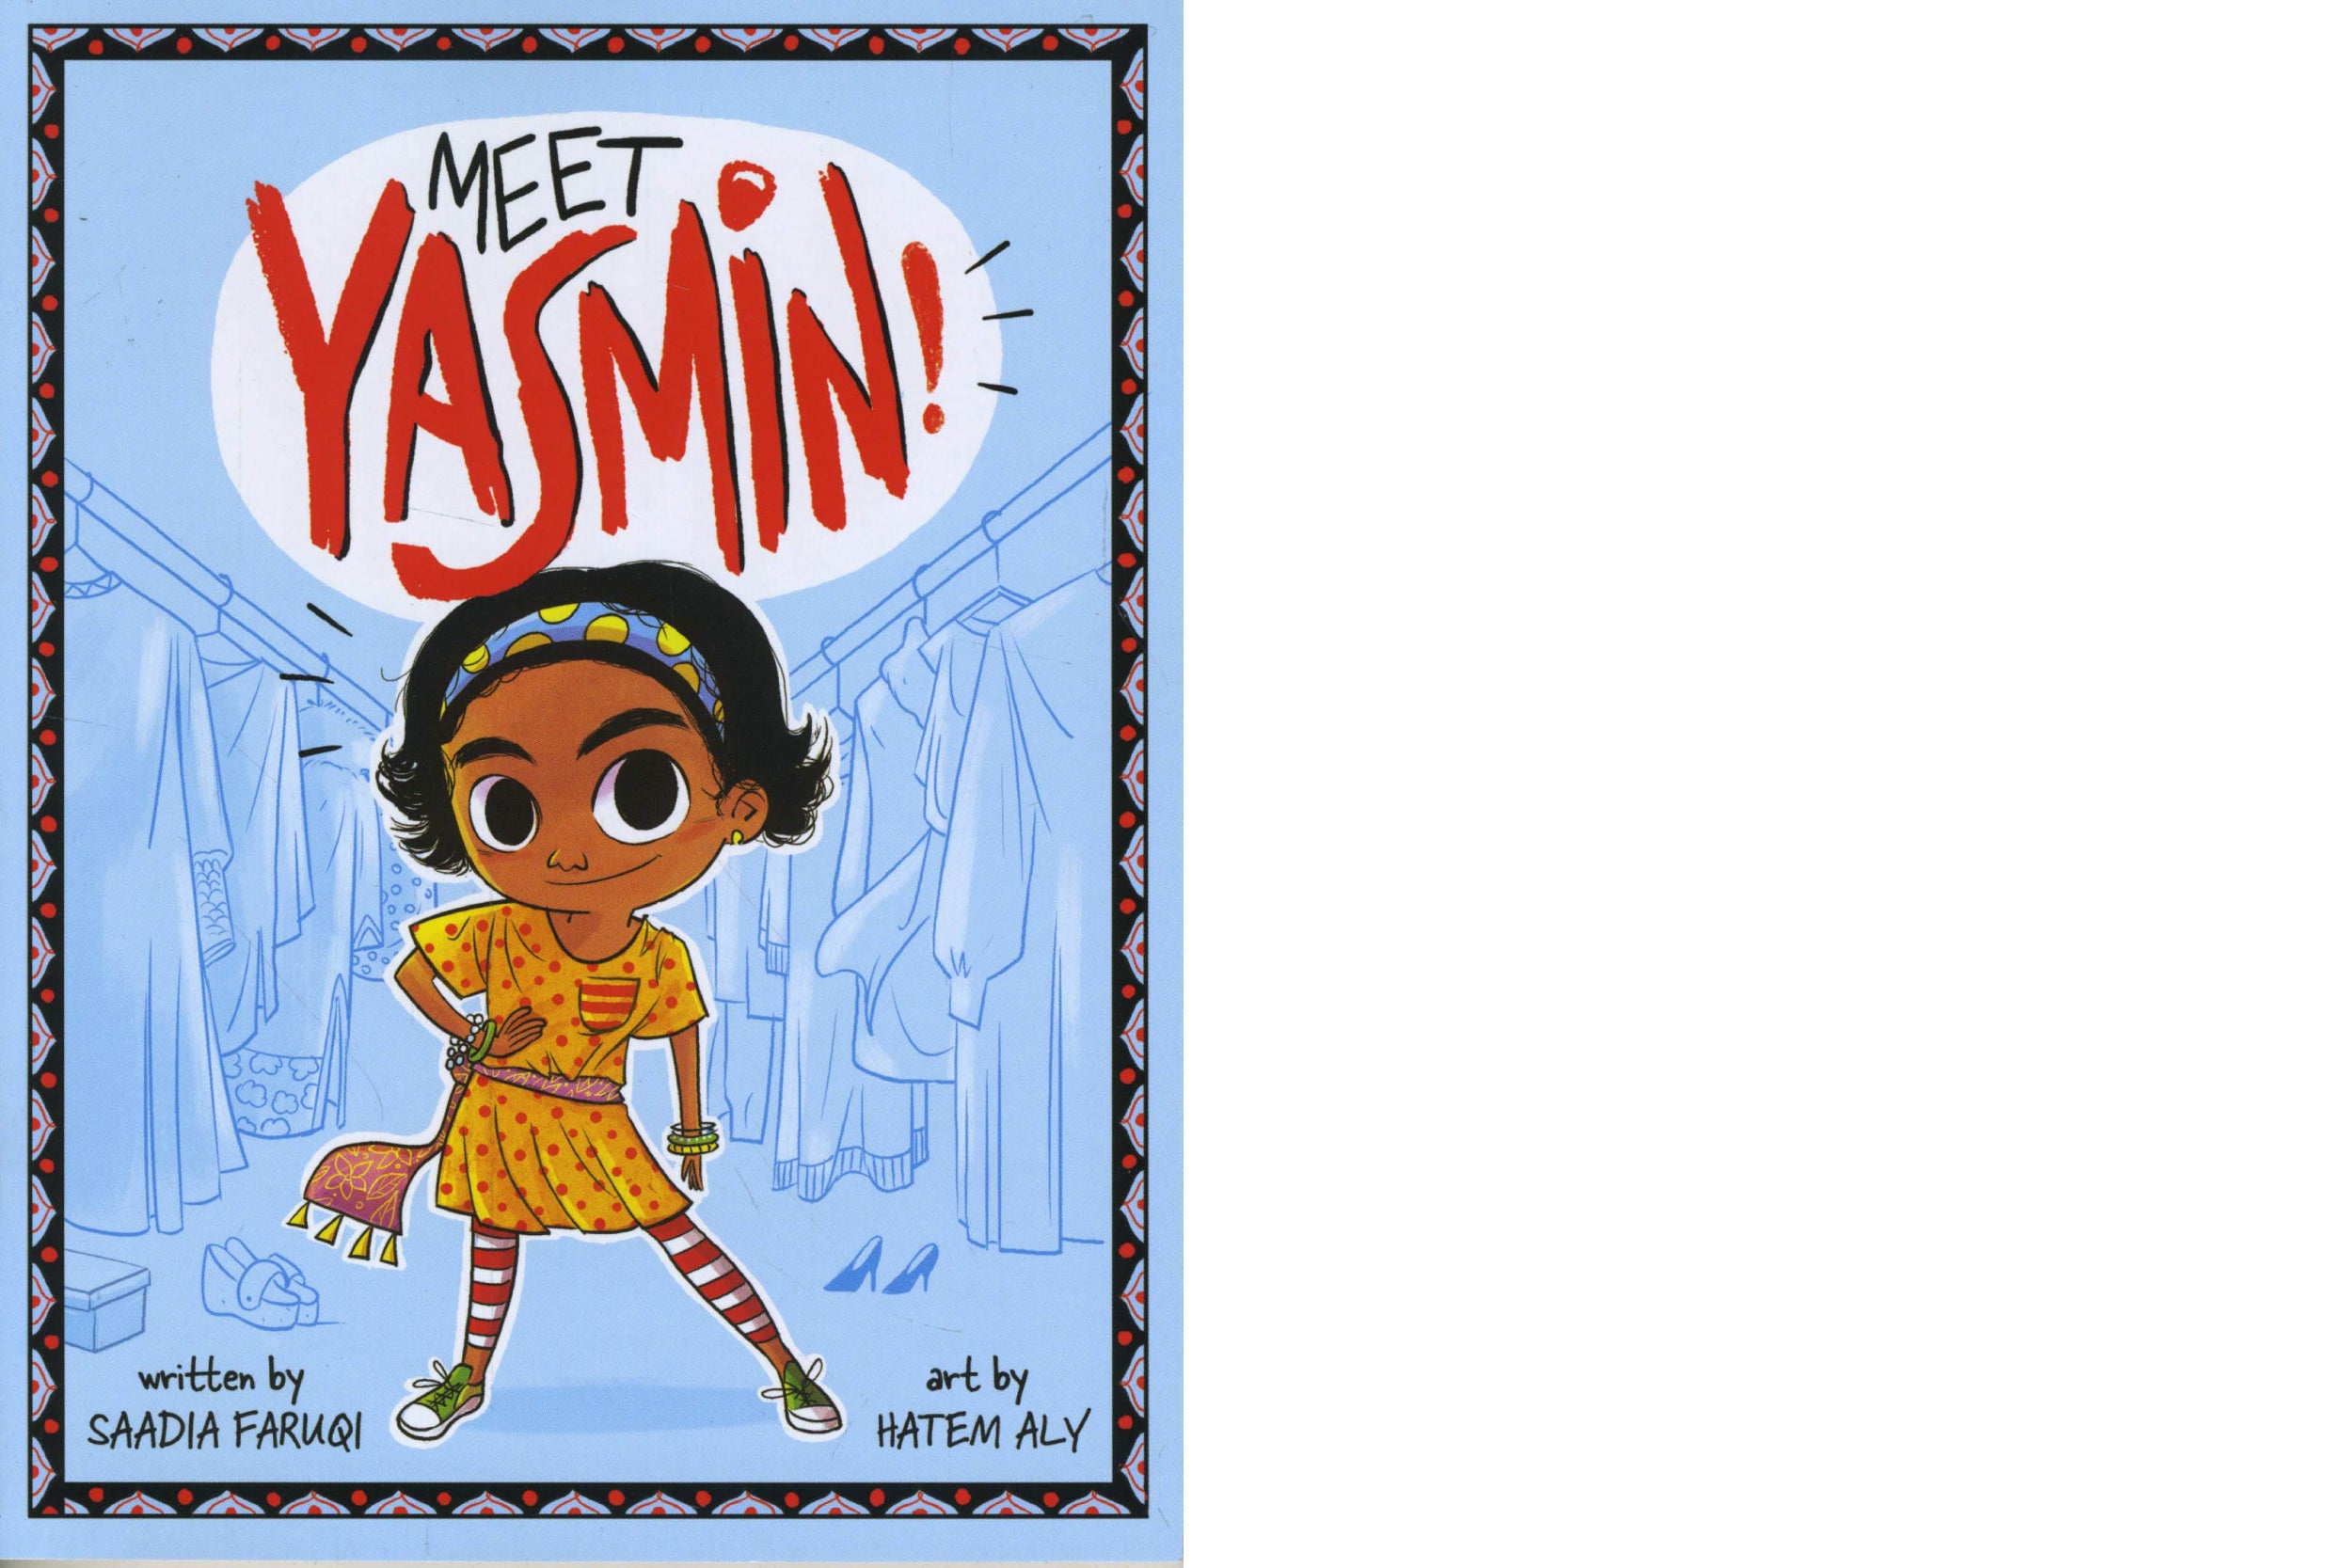 Book cover: “Meet Yasmin!” by Saadia Faruqi and illustrated by Hatem Aly.